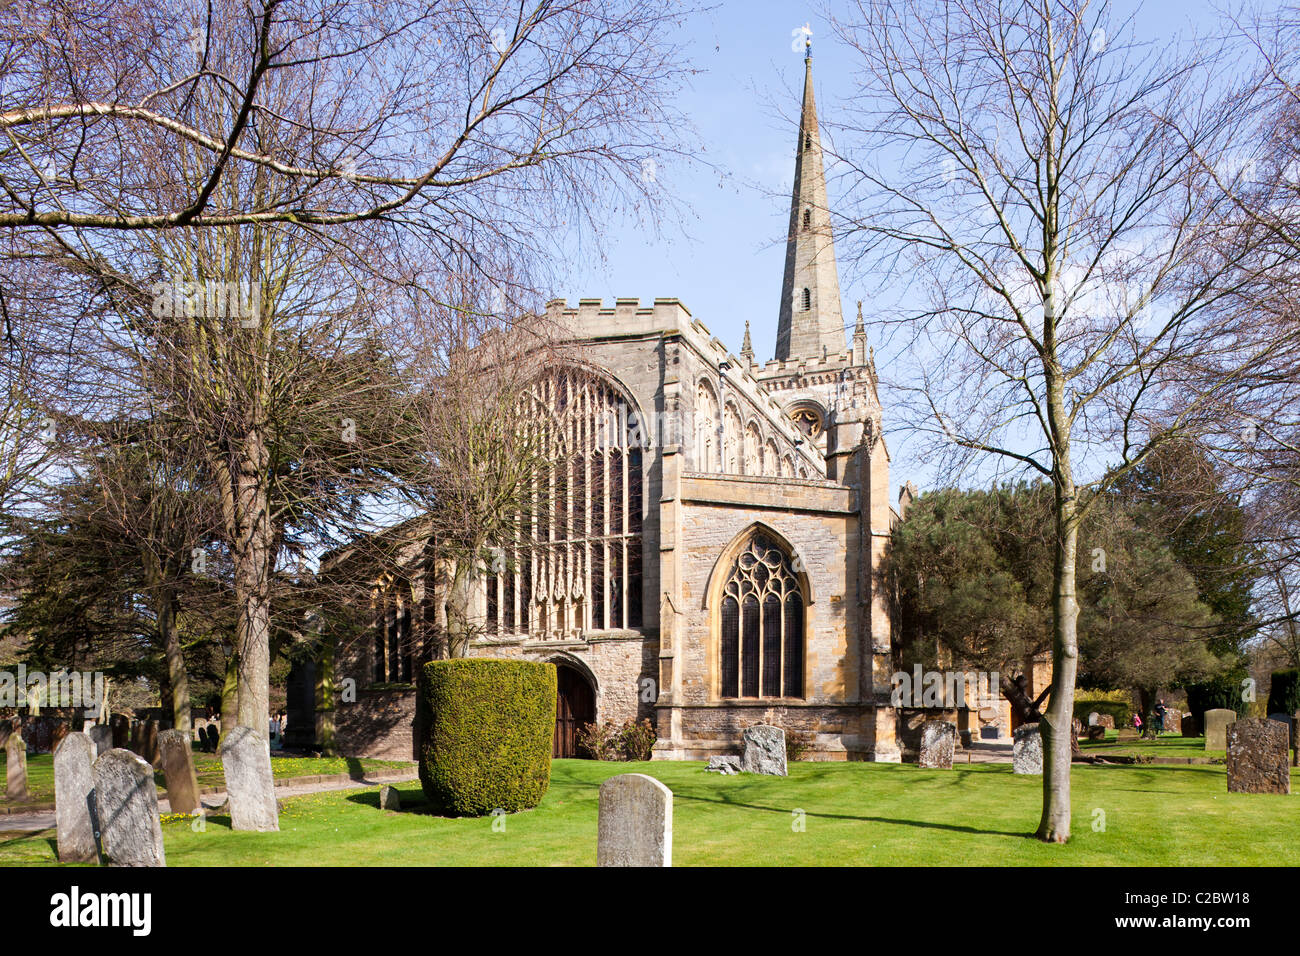 Springtime at Holy Trinity church, Stratford upon Avon, Warwickshire - William and Anne Shakespeare are buried here Stock Photo